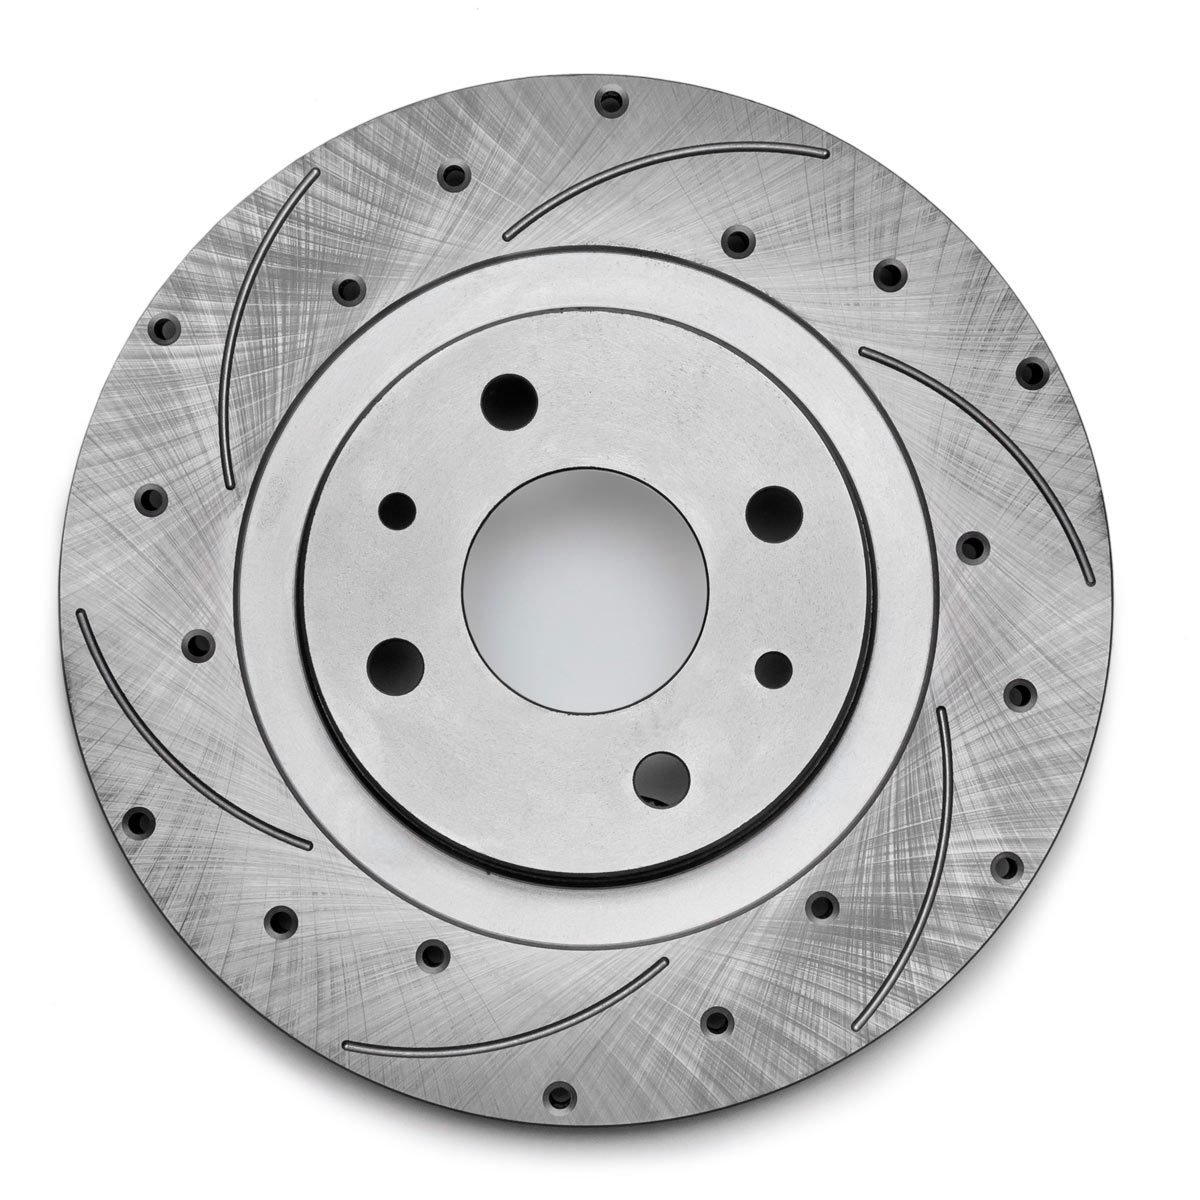 What You Need to Know About Brake Rotors